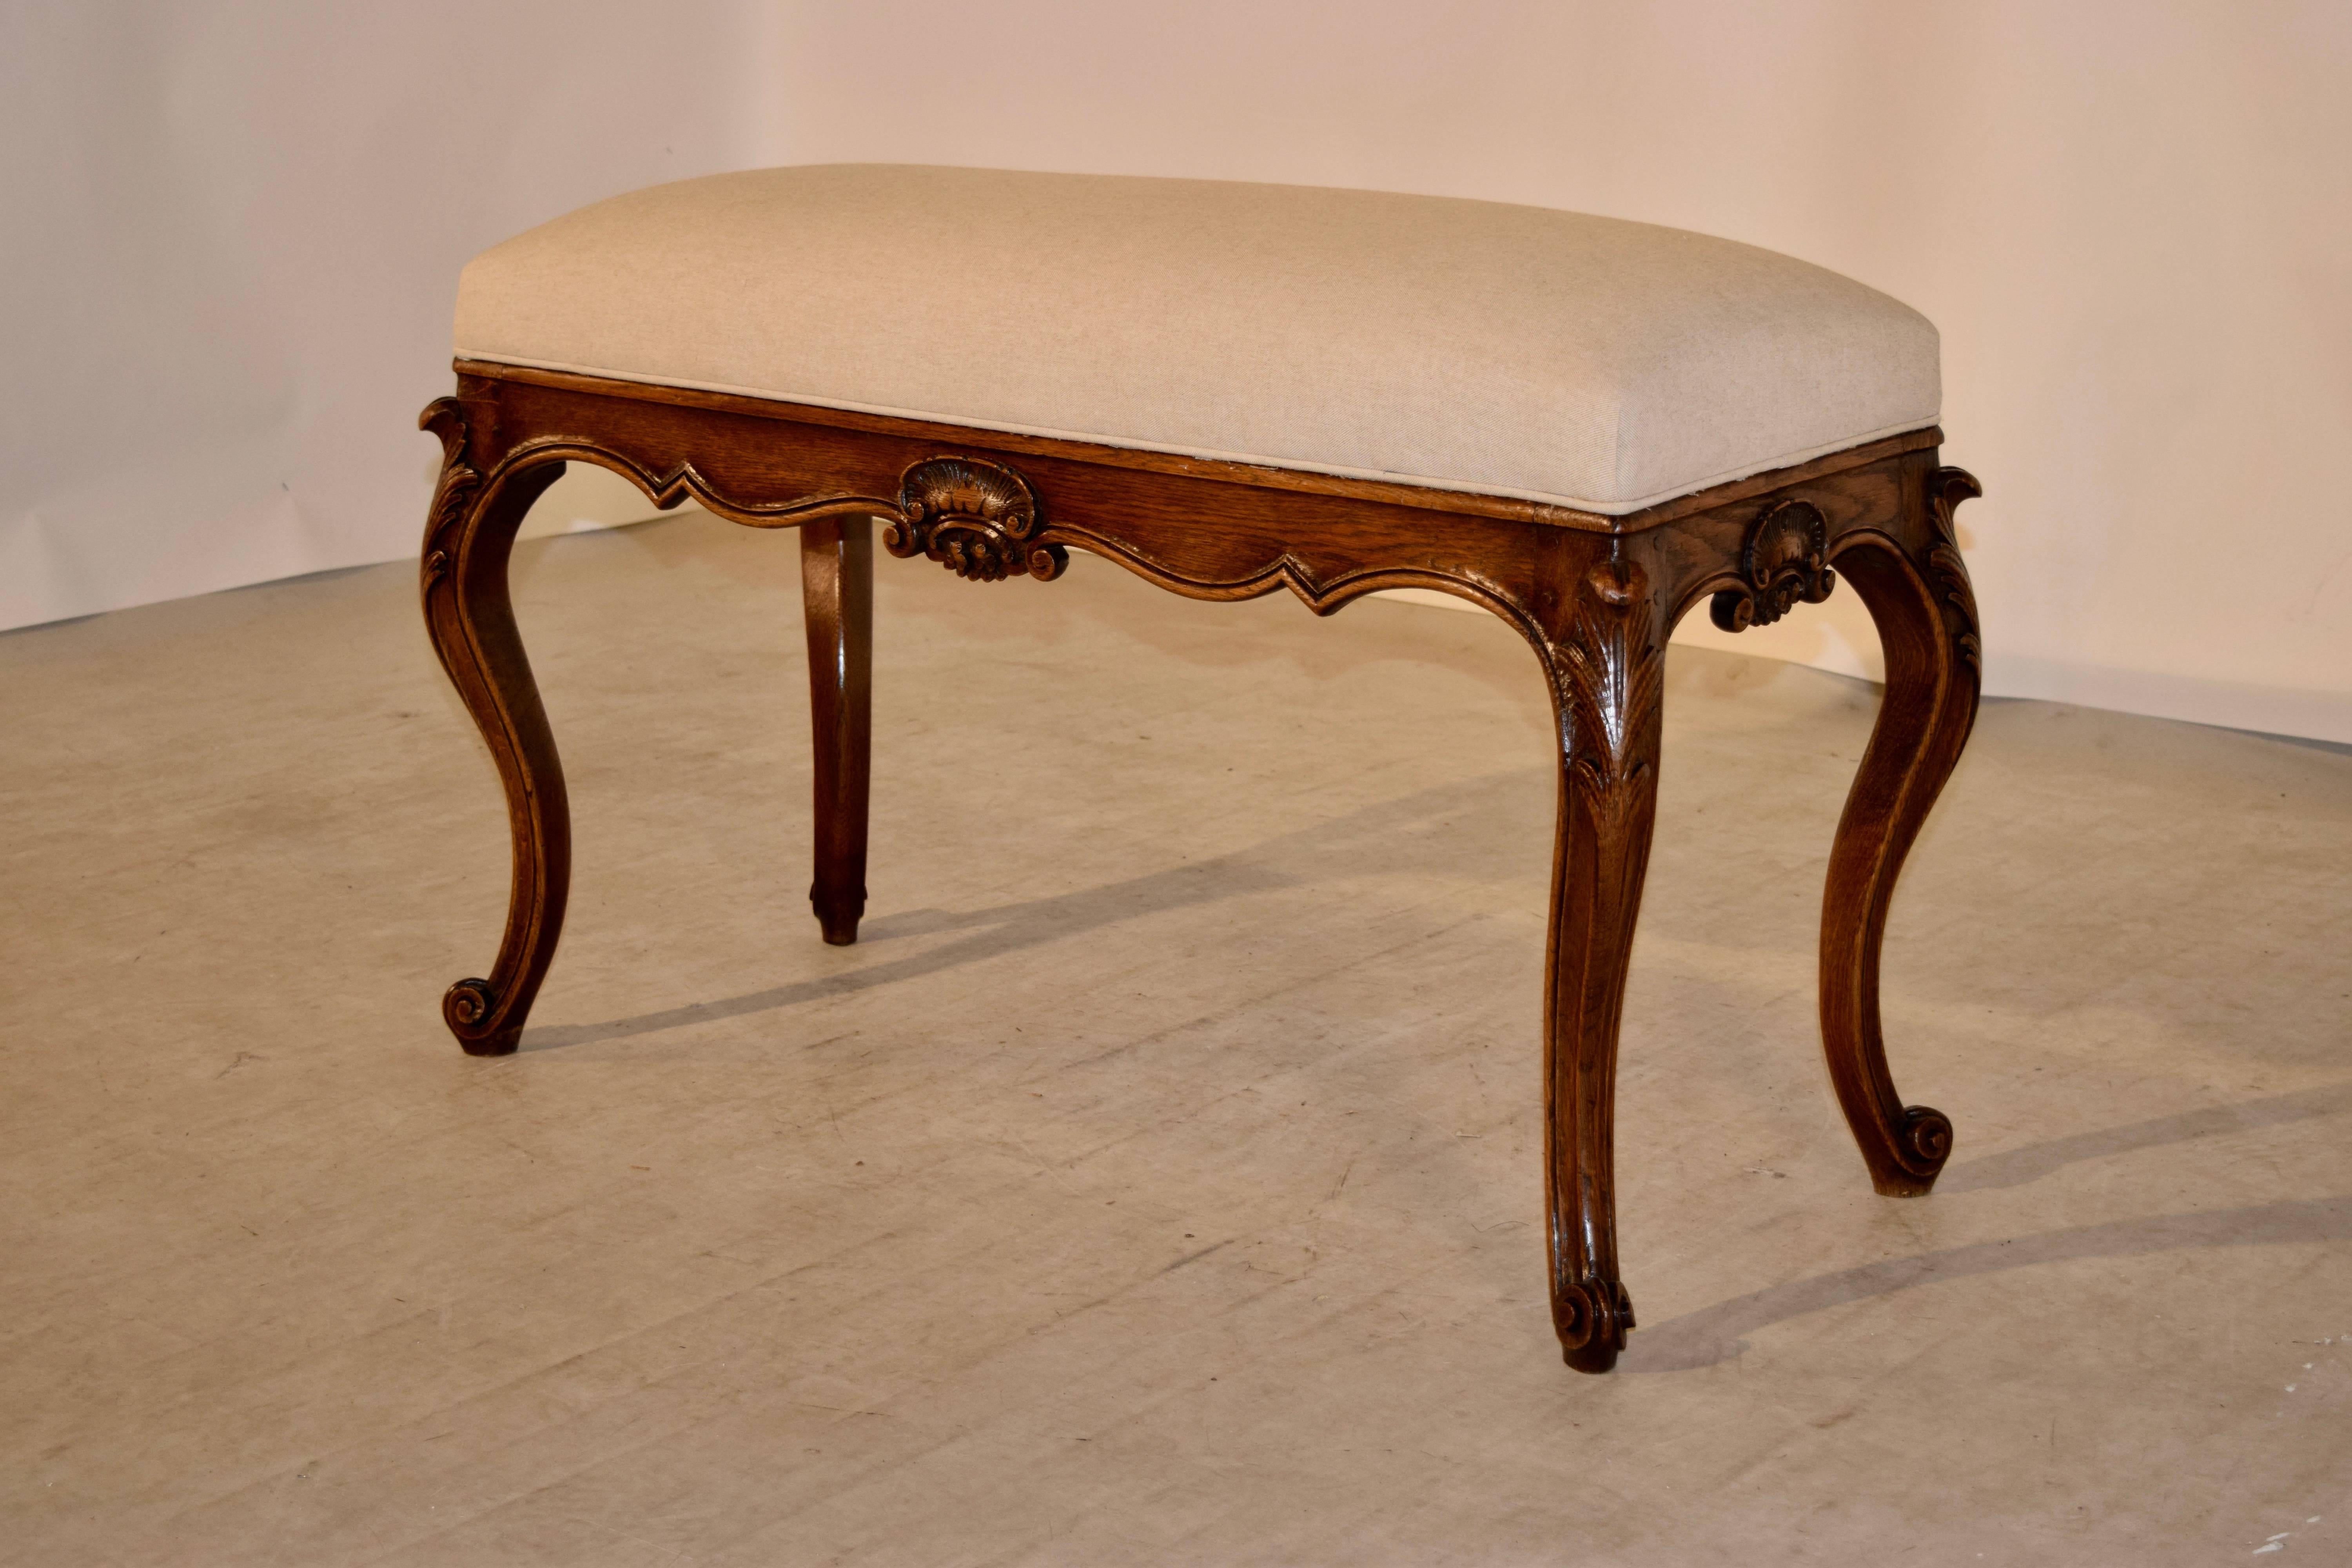 19th century French bench with a newly upholstered top in linen. The frame is hand carved from oak and has a scalloped apron, which has hand-carved shell embellishments and wonderful cabriole legs ending in scroll feet.